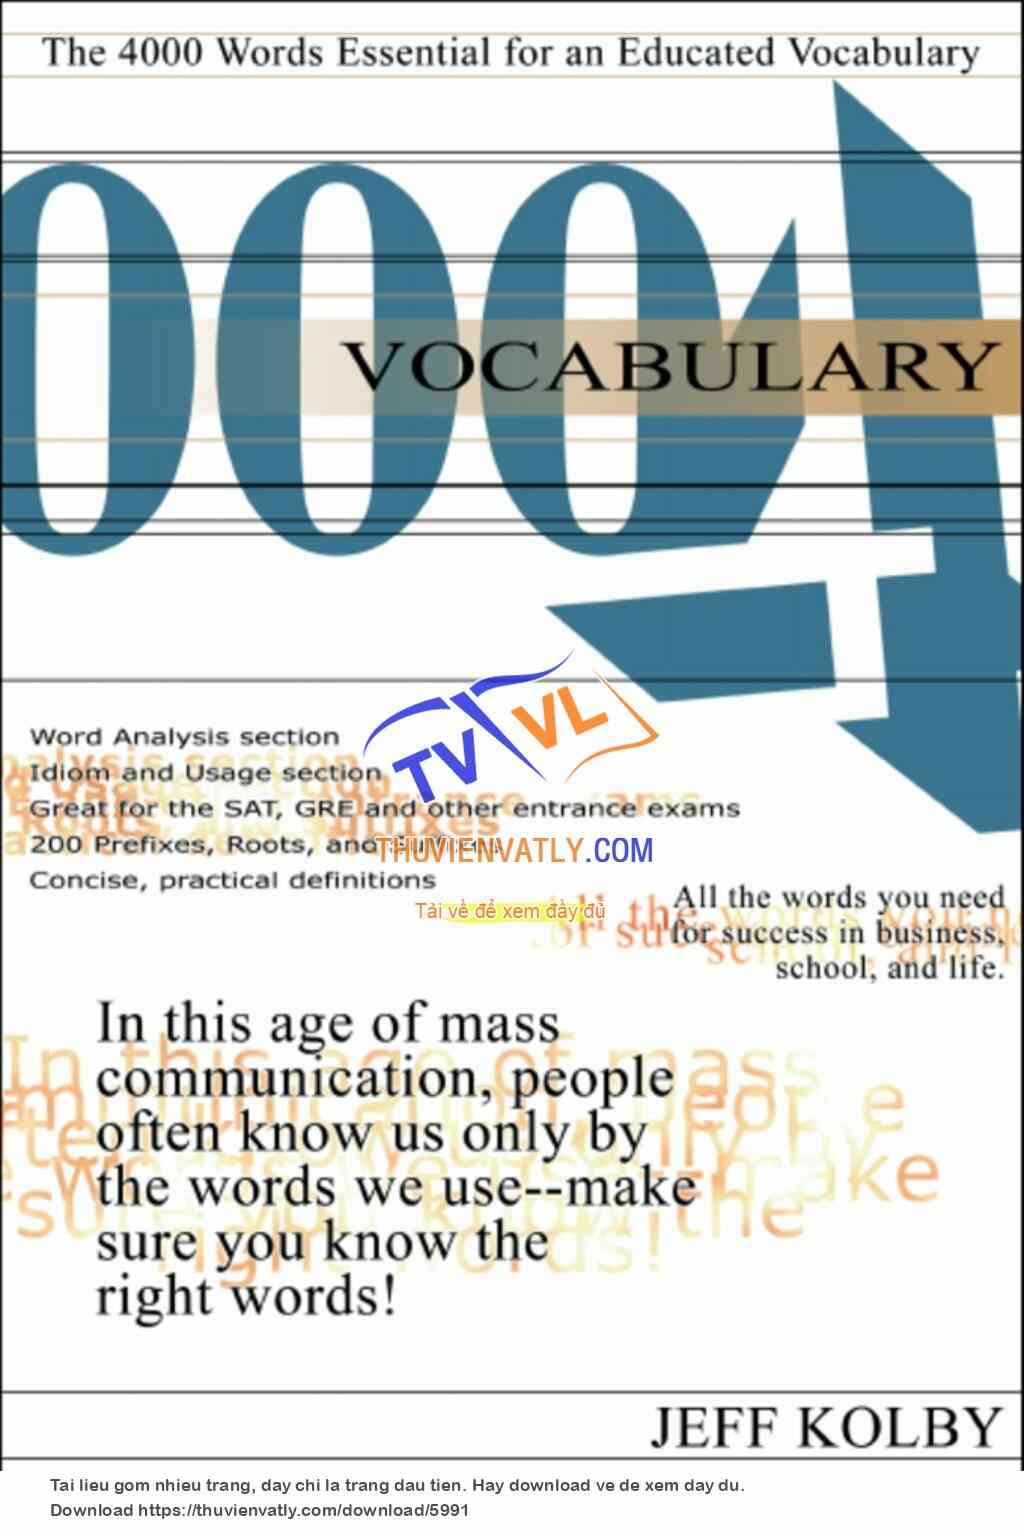 4000 Words Essential for an Educated Vocabulary